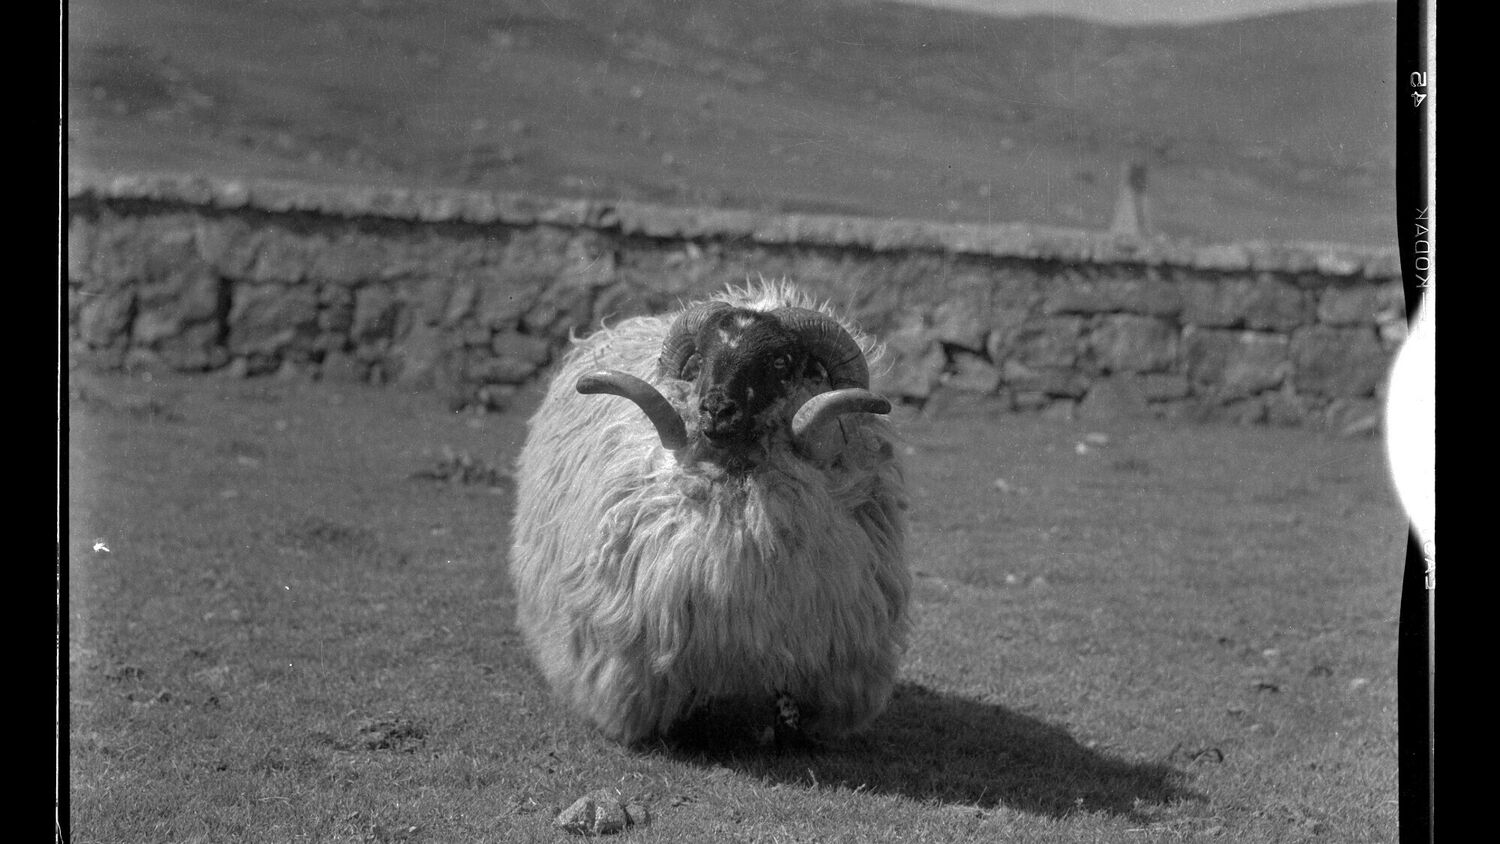 Black and white photograph of a large, hairy ram in a field with a stone wall behind.